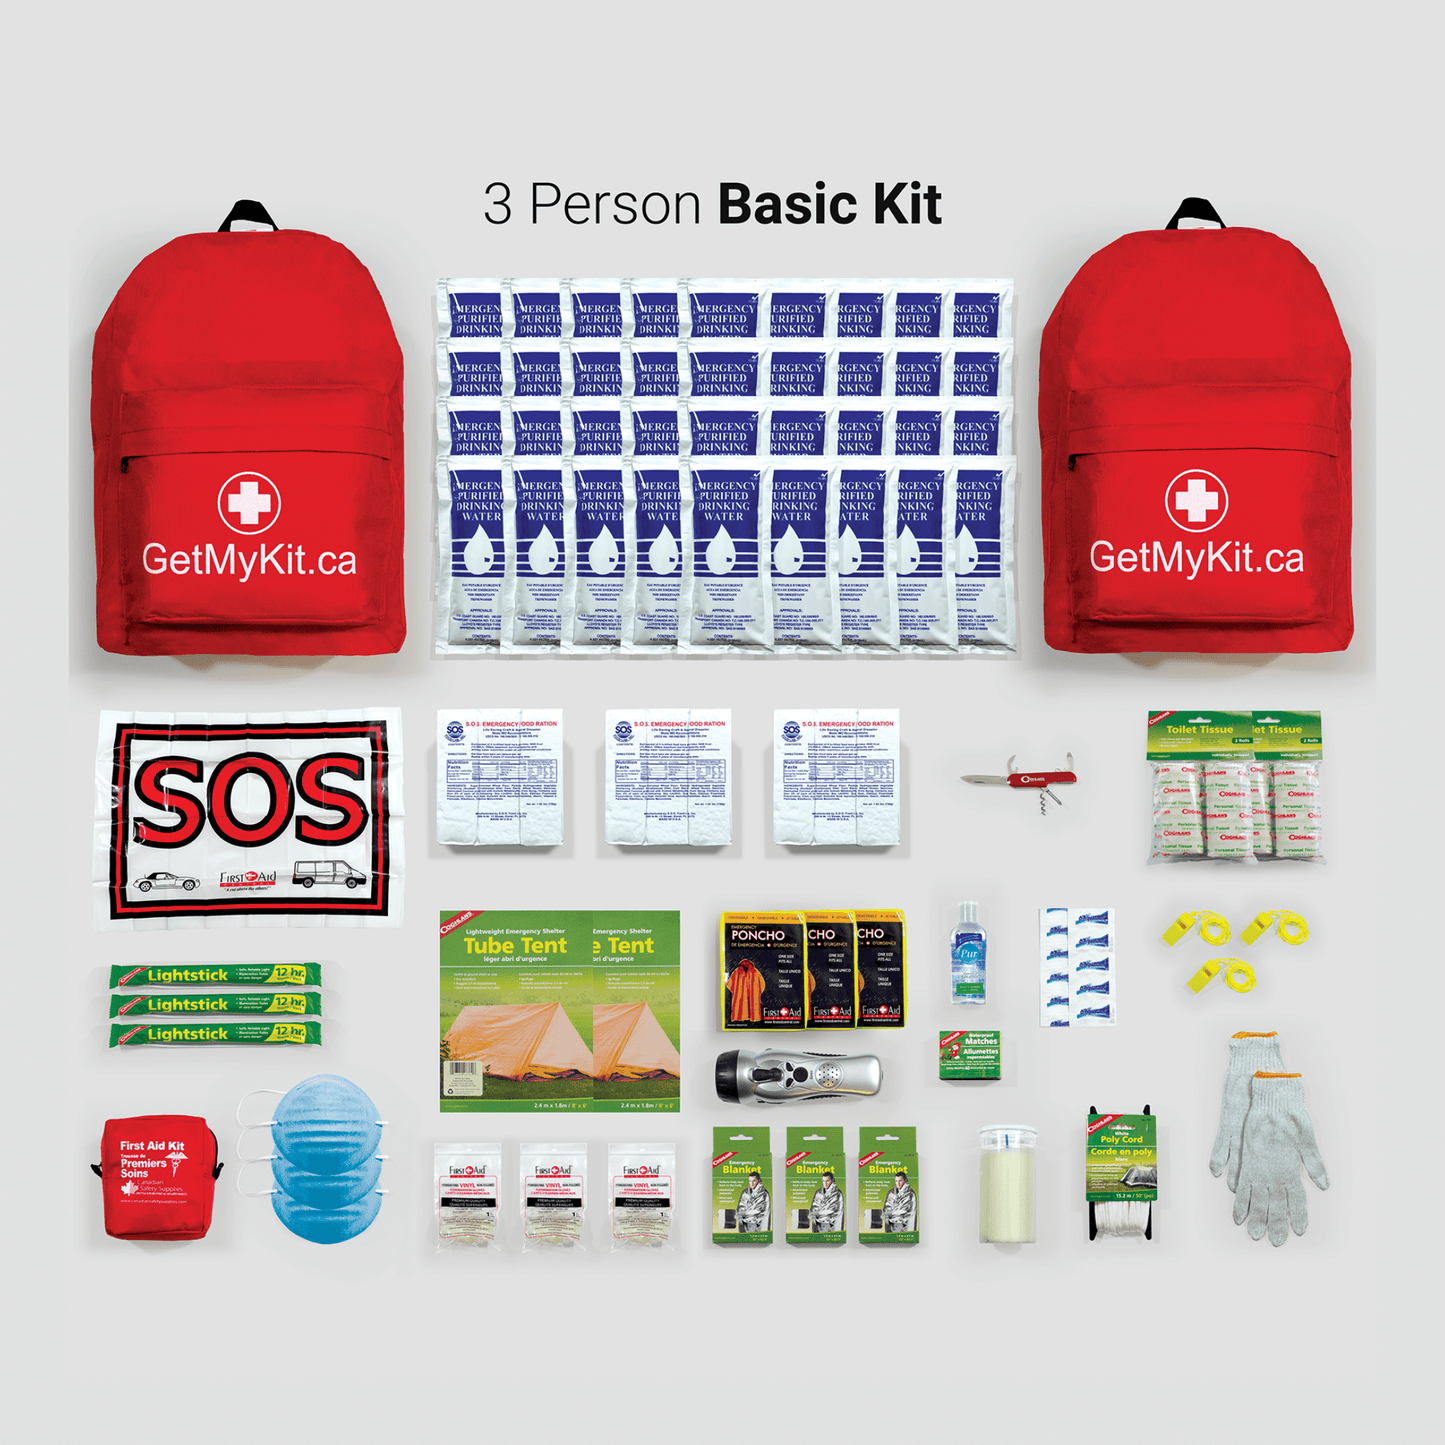 A three person basic emergency kit and its contents.